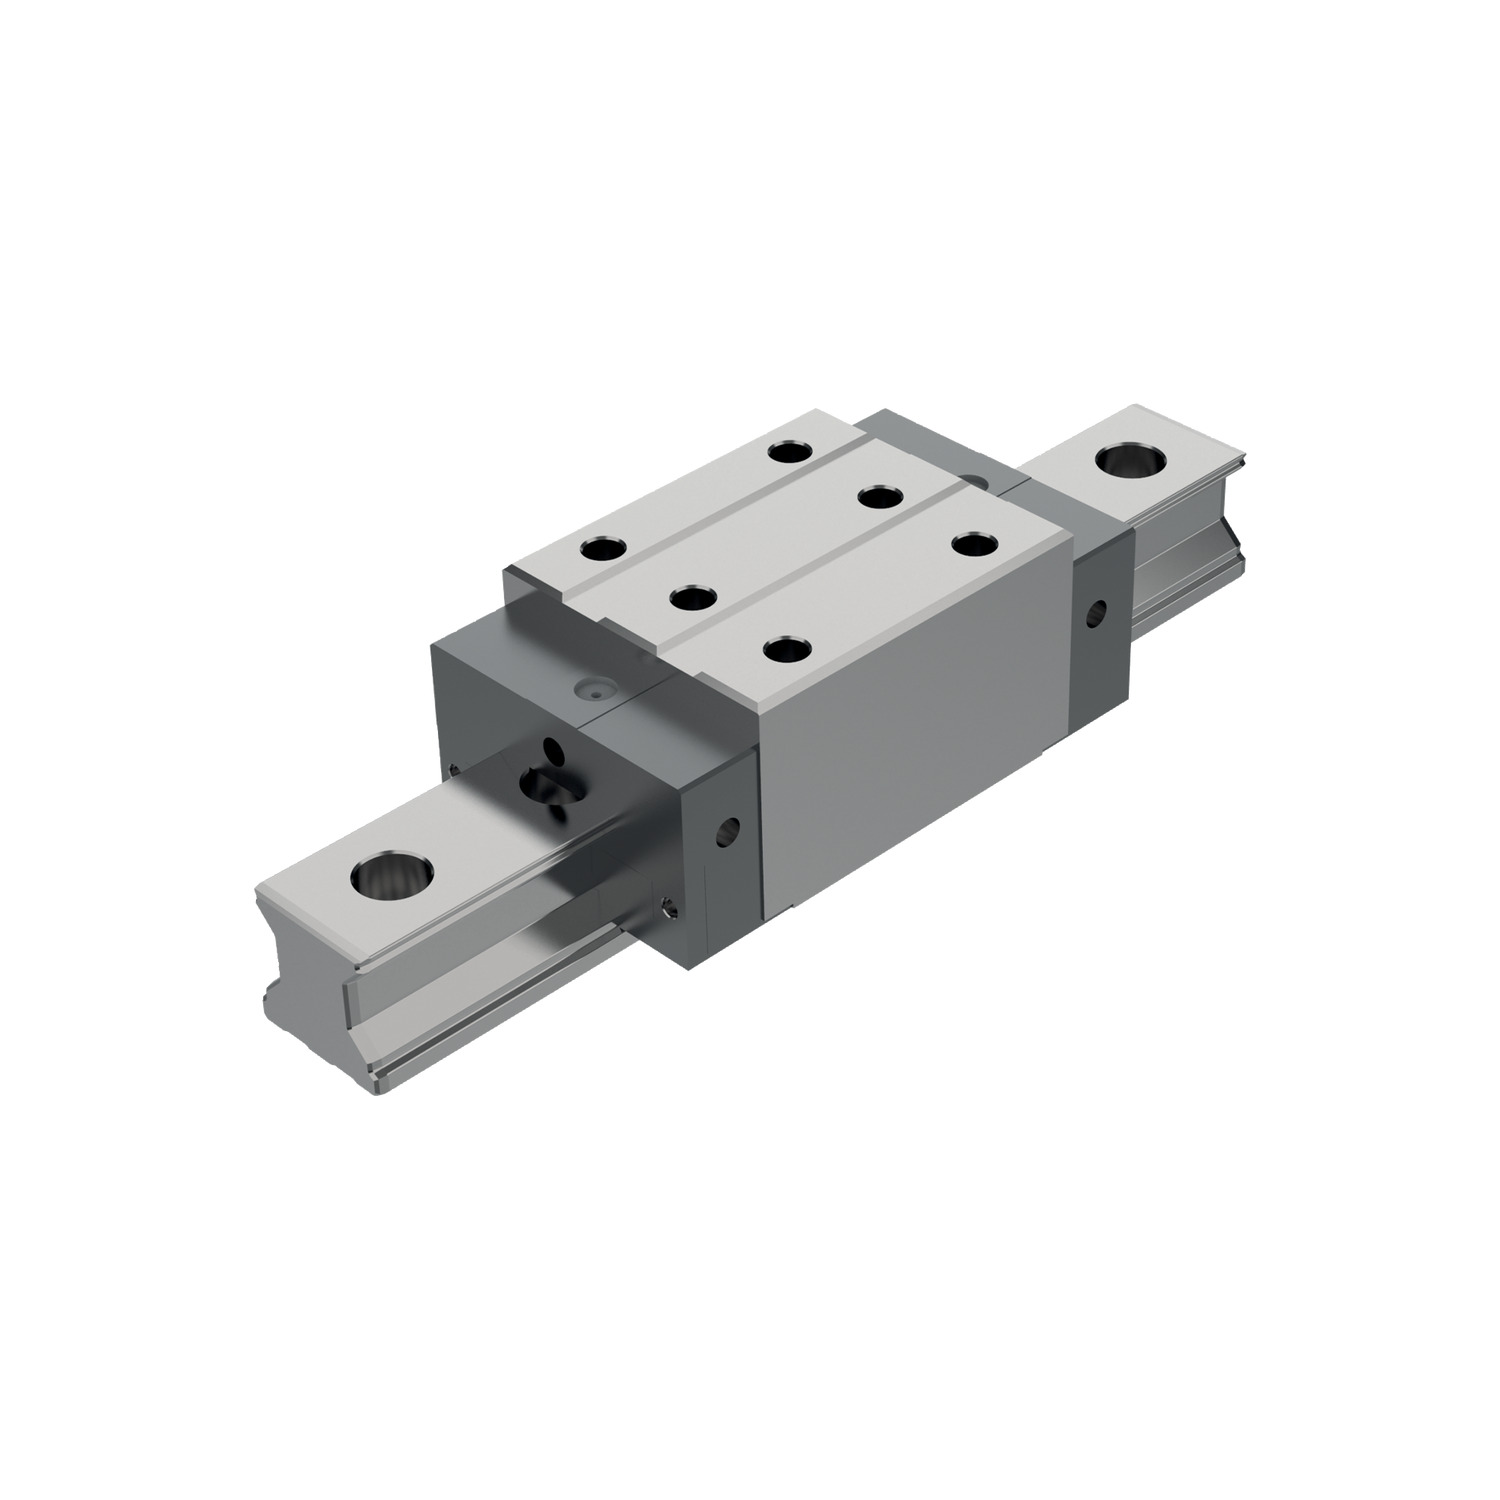 L1017.U35 Unflanged size 35 standard carriage Roller Linear Guide Carriage